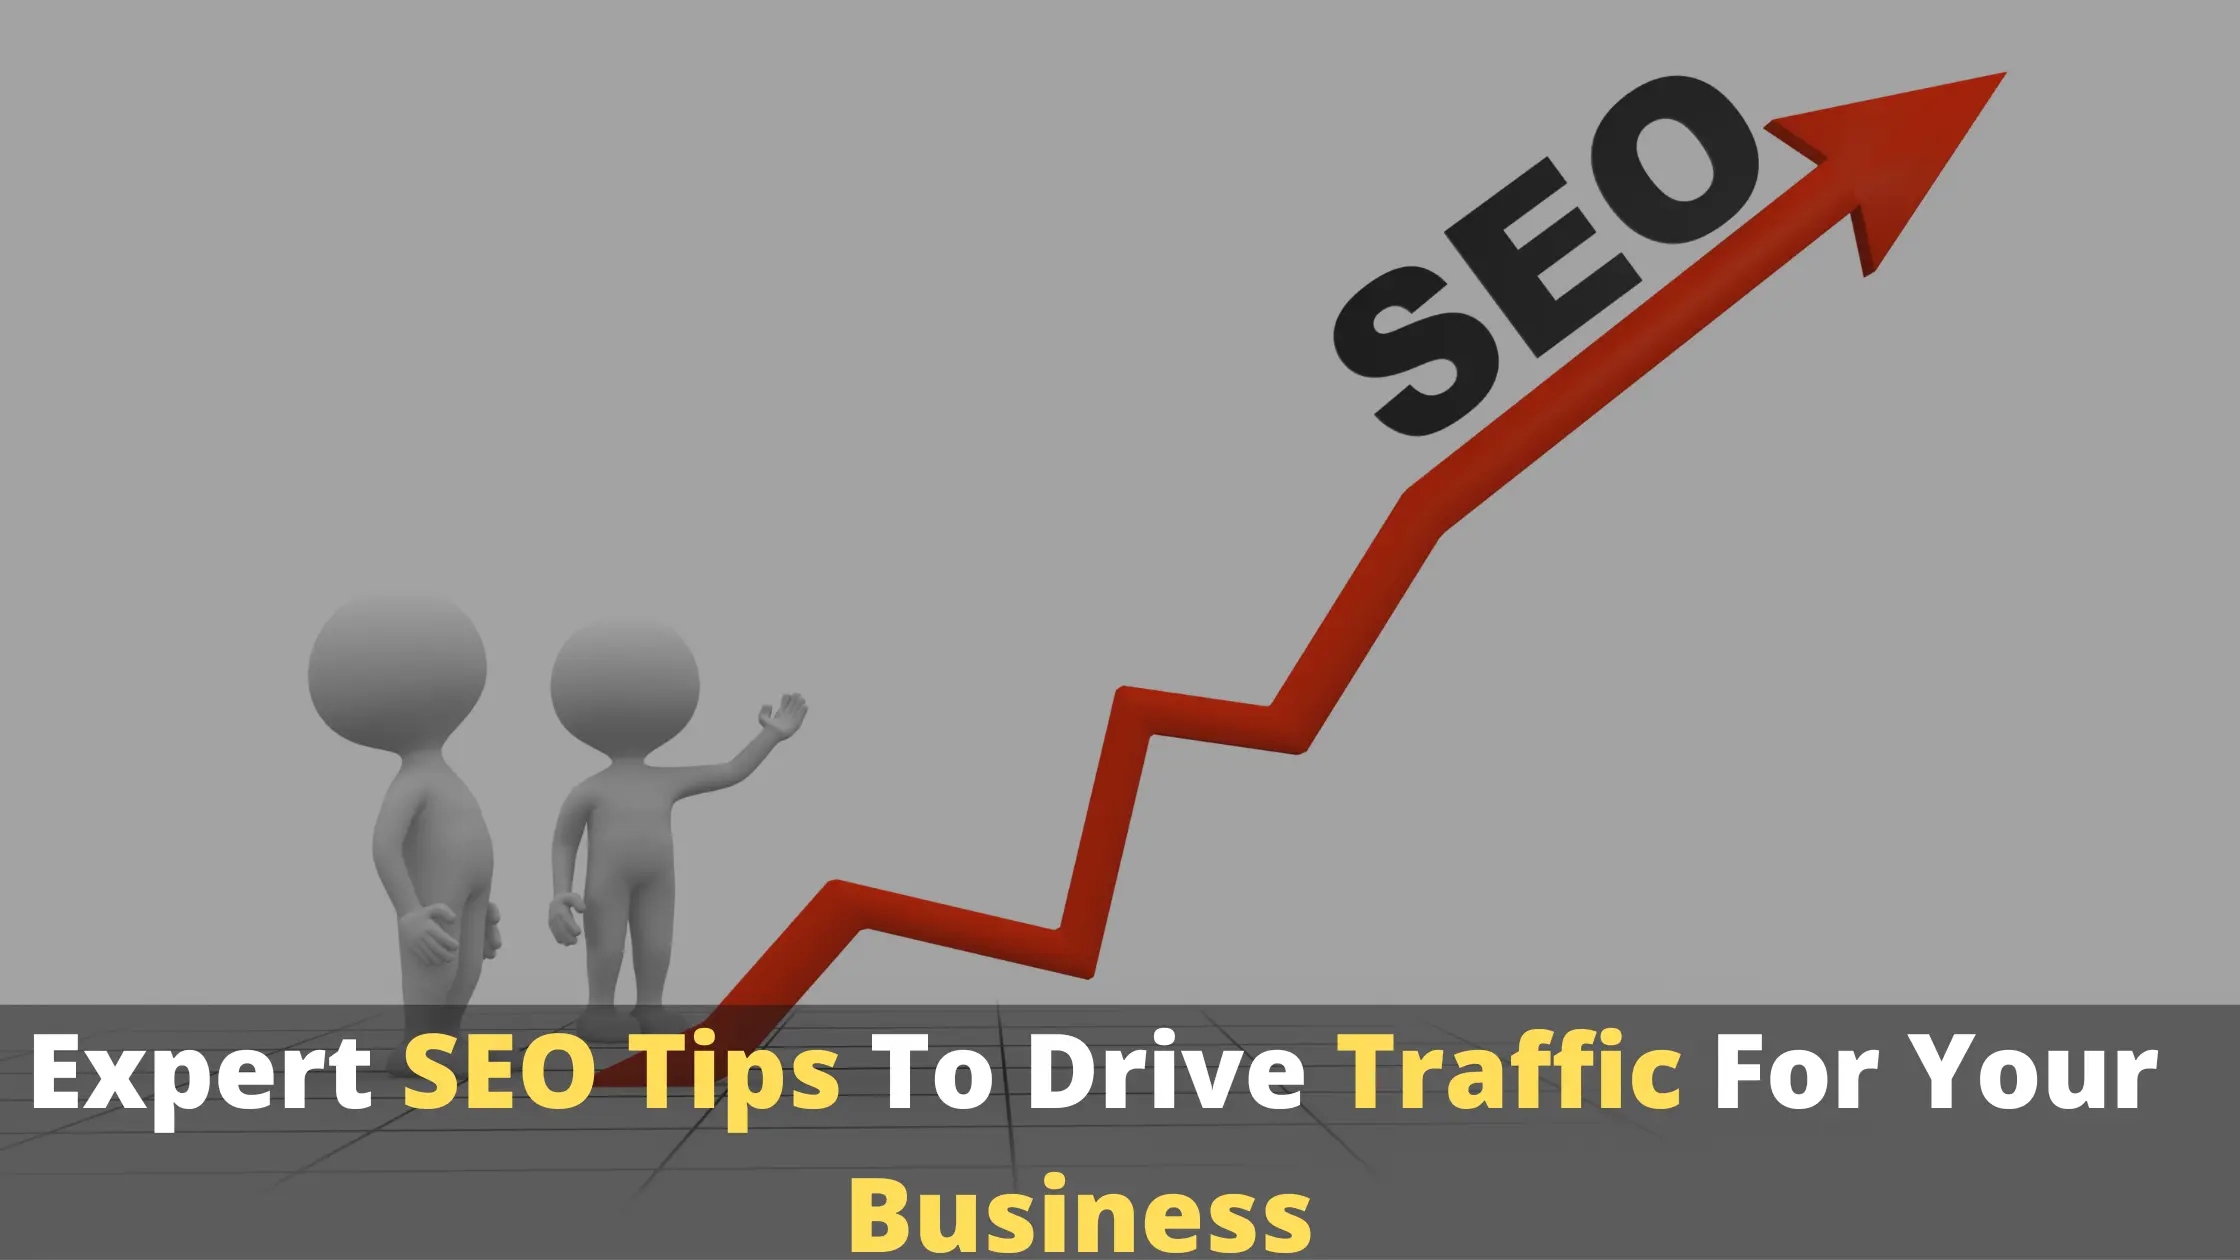 10 Expert SEO Tips To Drive Traffic For Your Business - Top Recommended